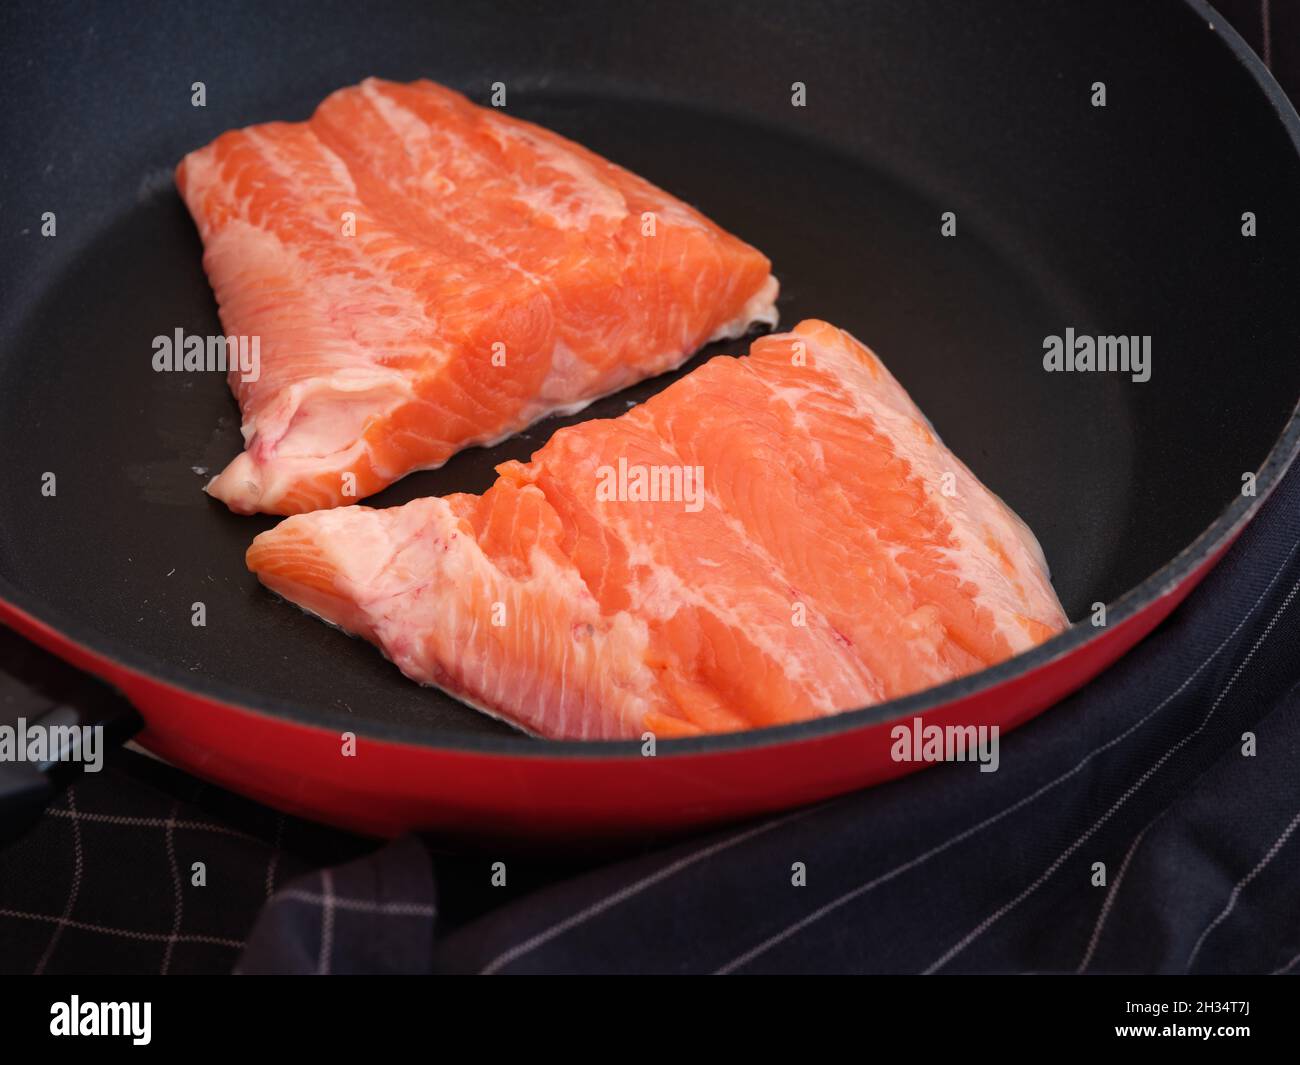 Two trout fillet slices lying in a frying pan ready to be cooked. Low key. Close up. Stock Photo